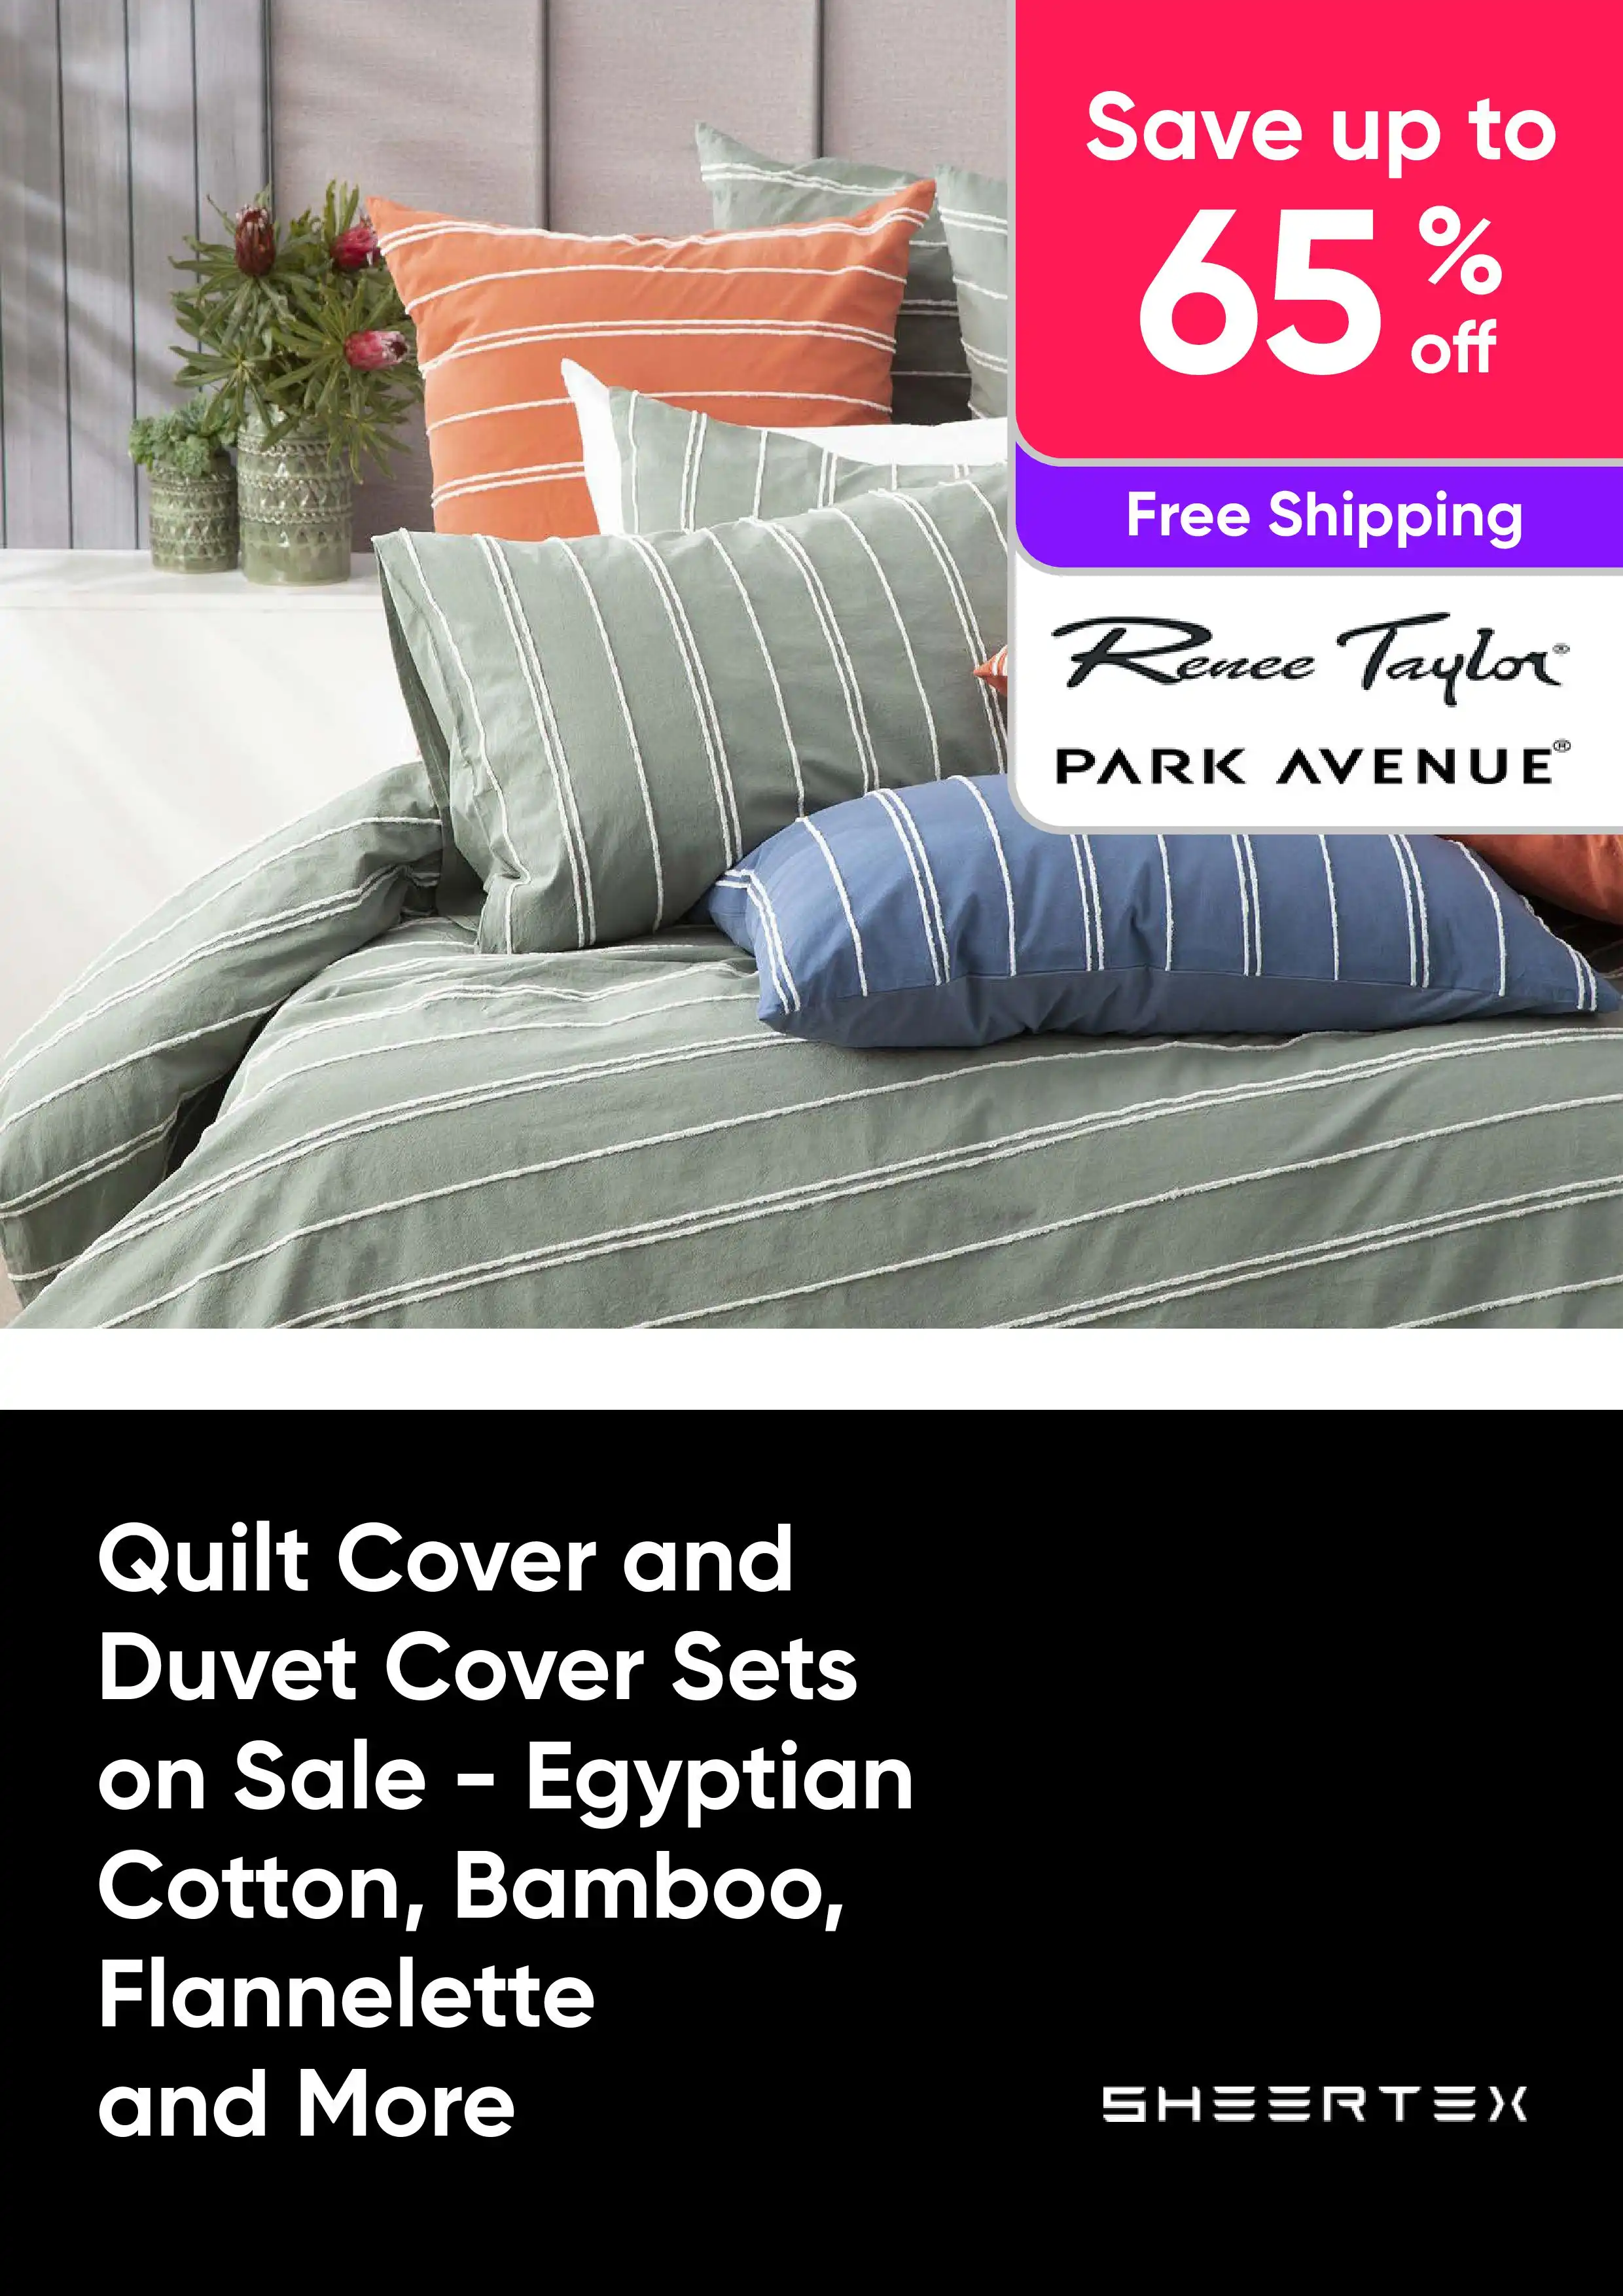 Quilt Cover and Duvet Cover Sets on Sale - Egyptian Cotton, Bamboo, Flannelette and More - Up to 65% Off